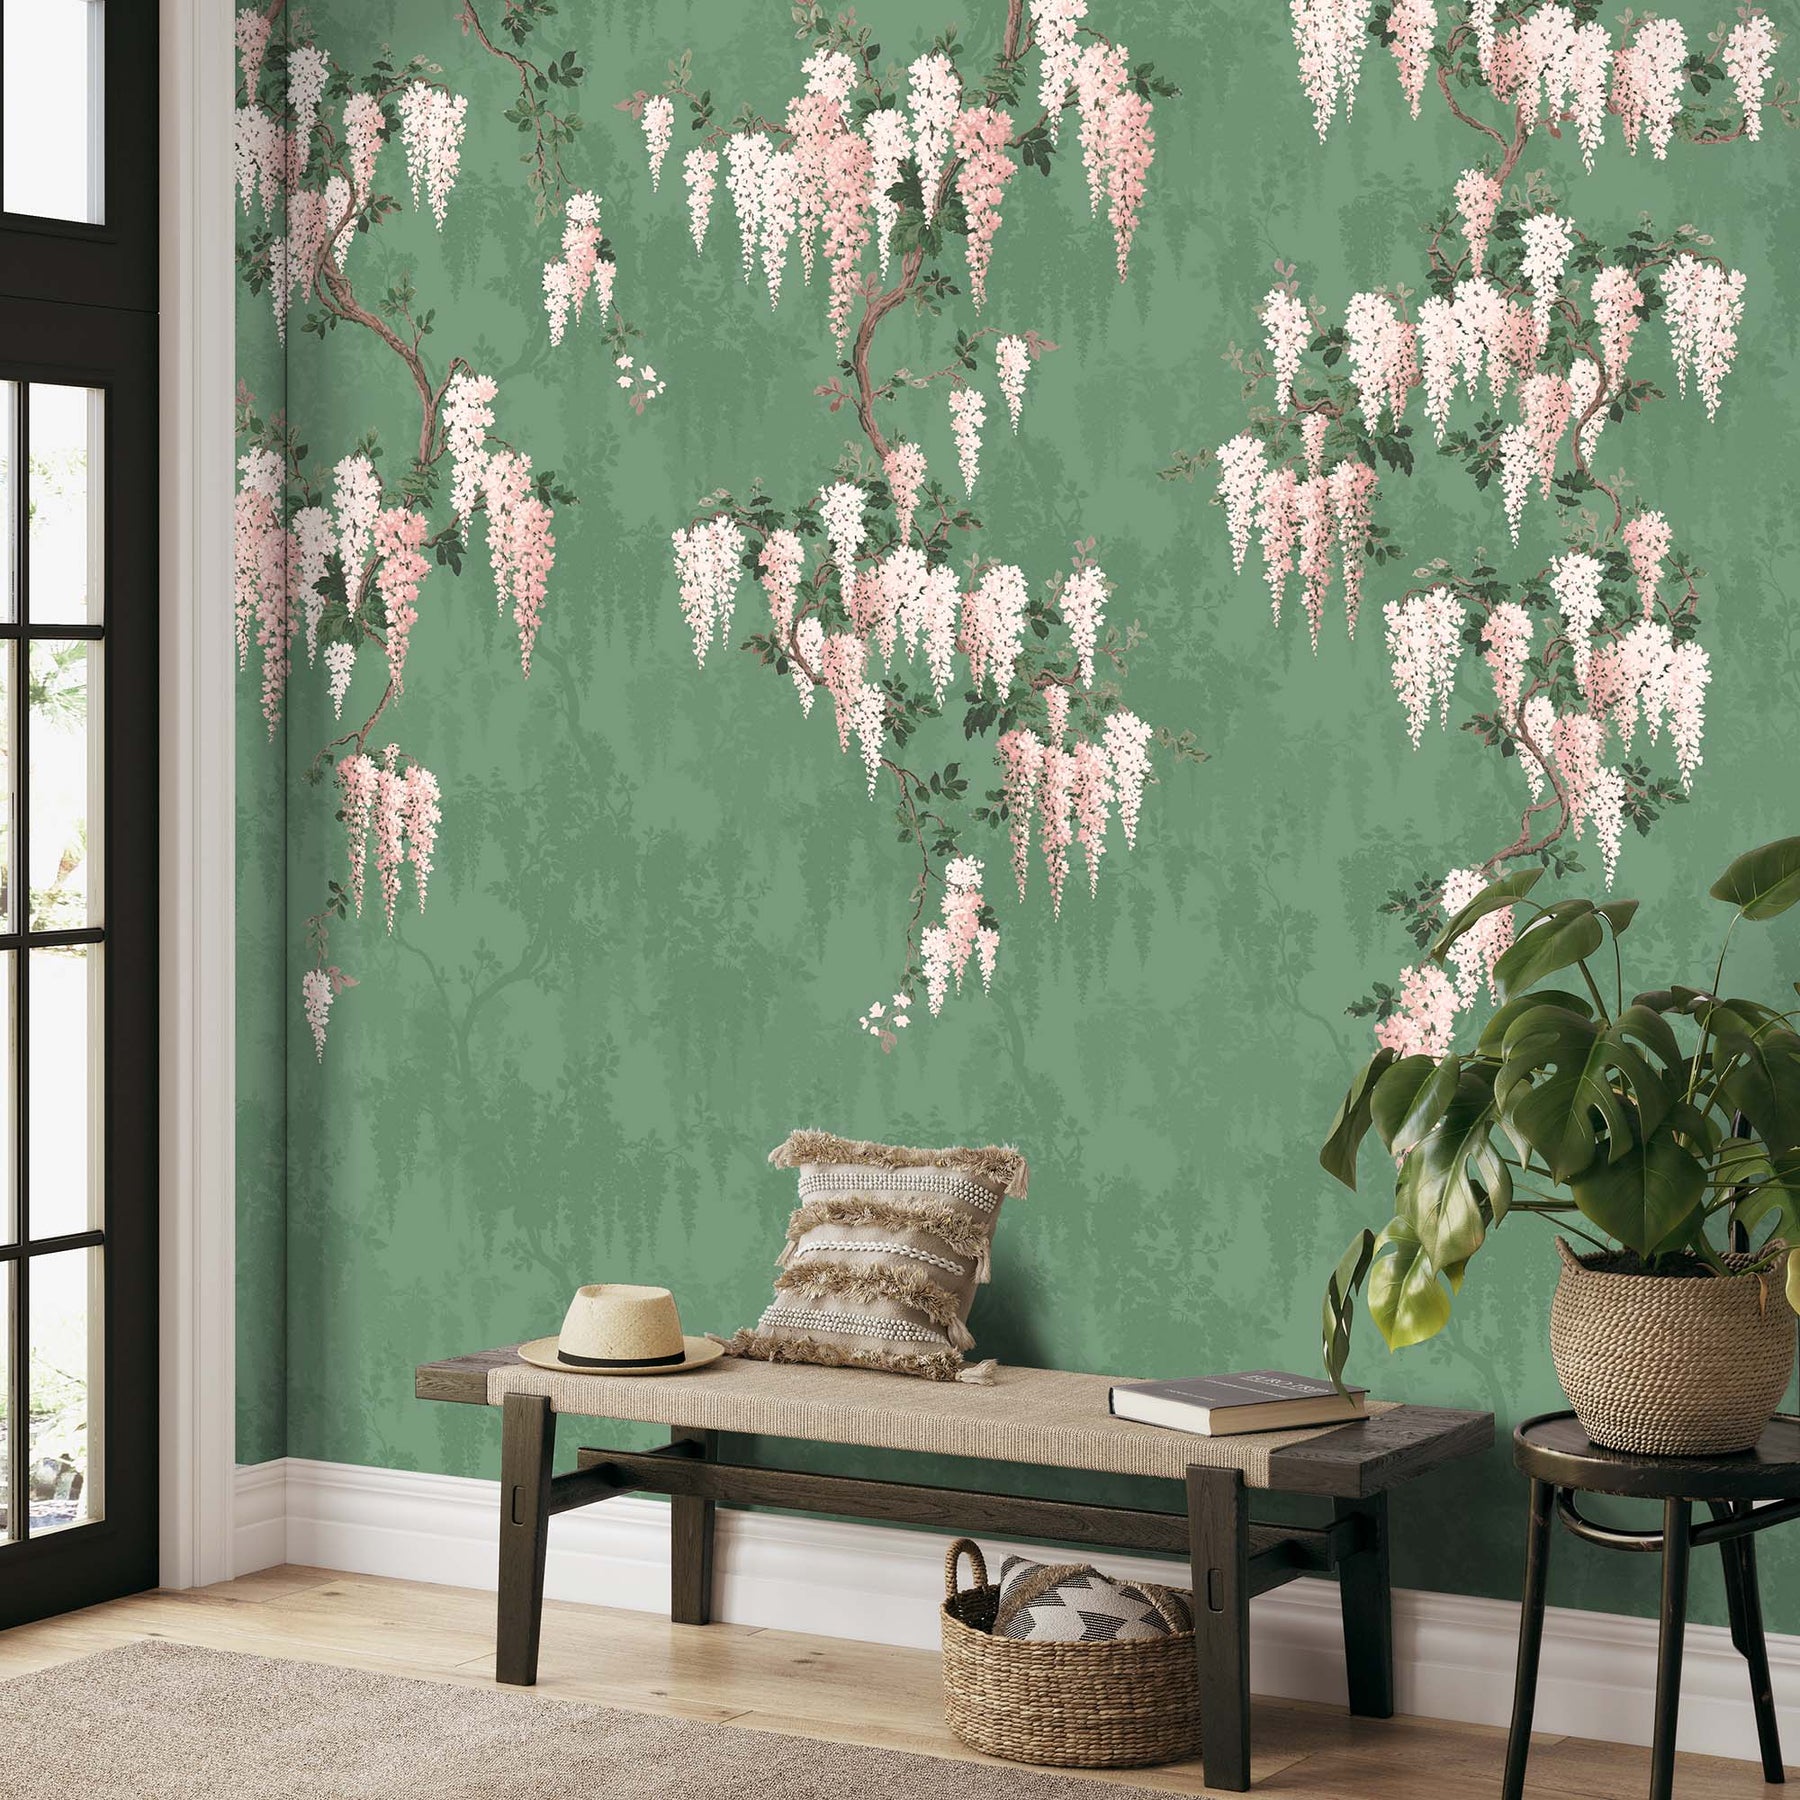 Wisteria Botanical Green Wall Mural Wallpaper Pink Bright Floral